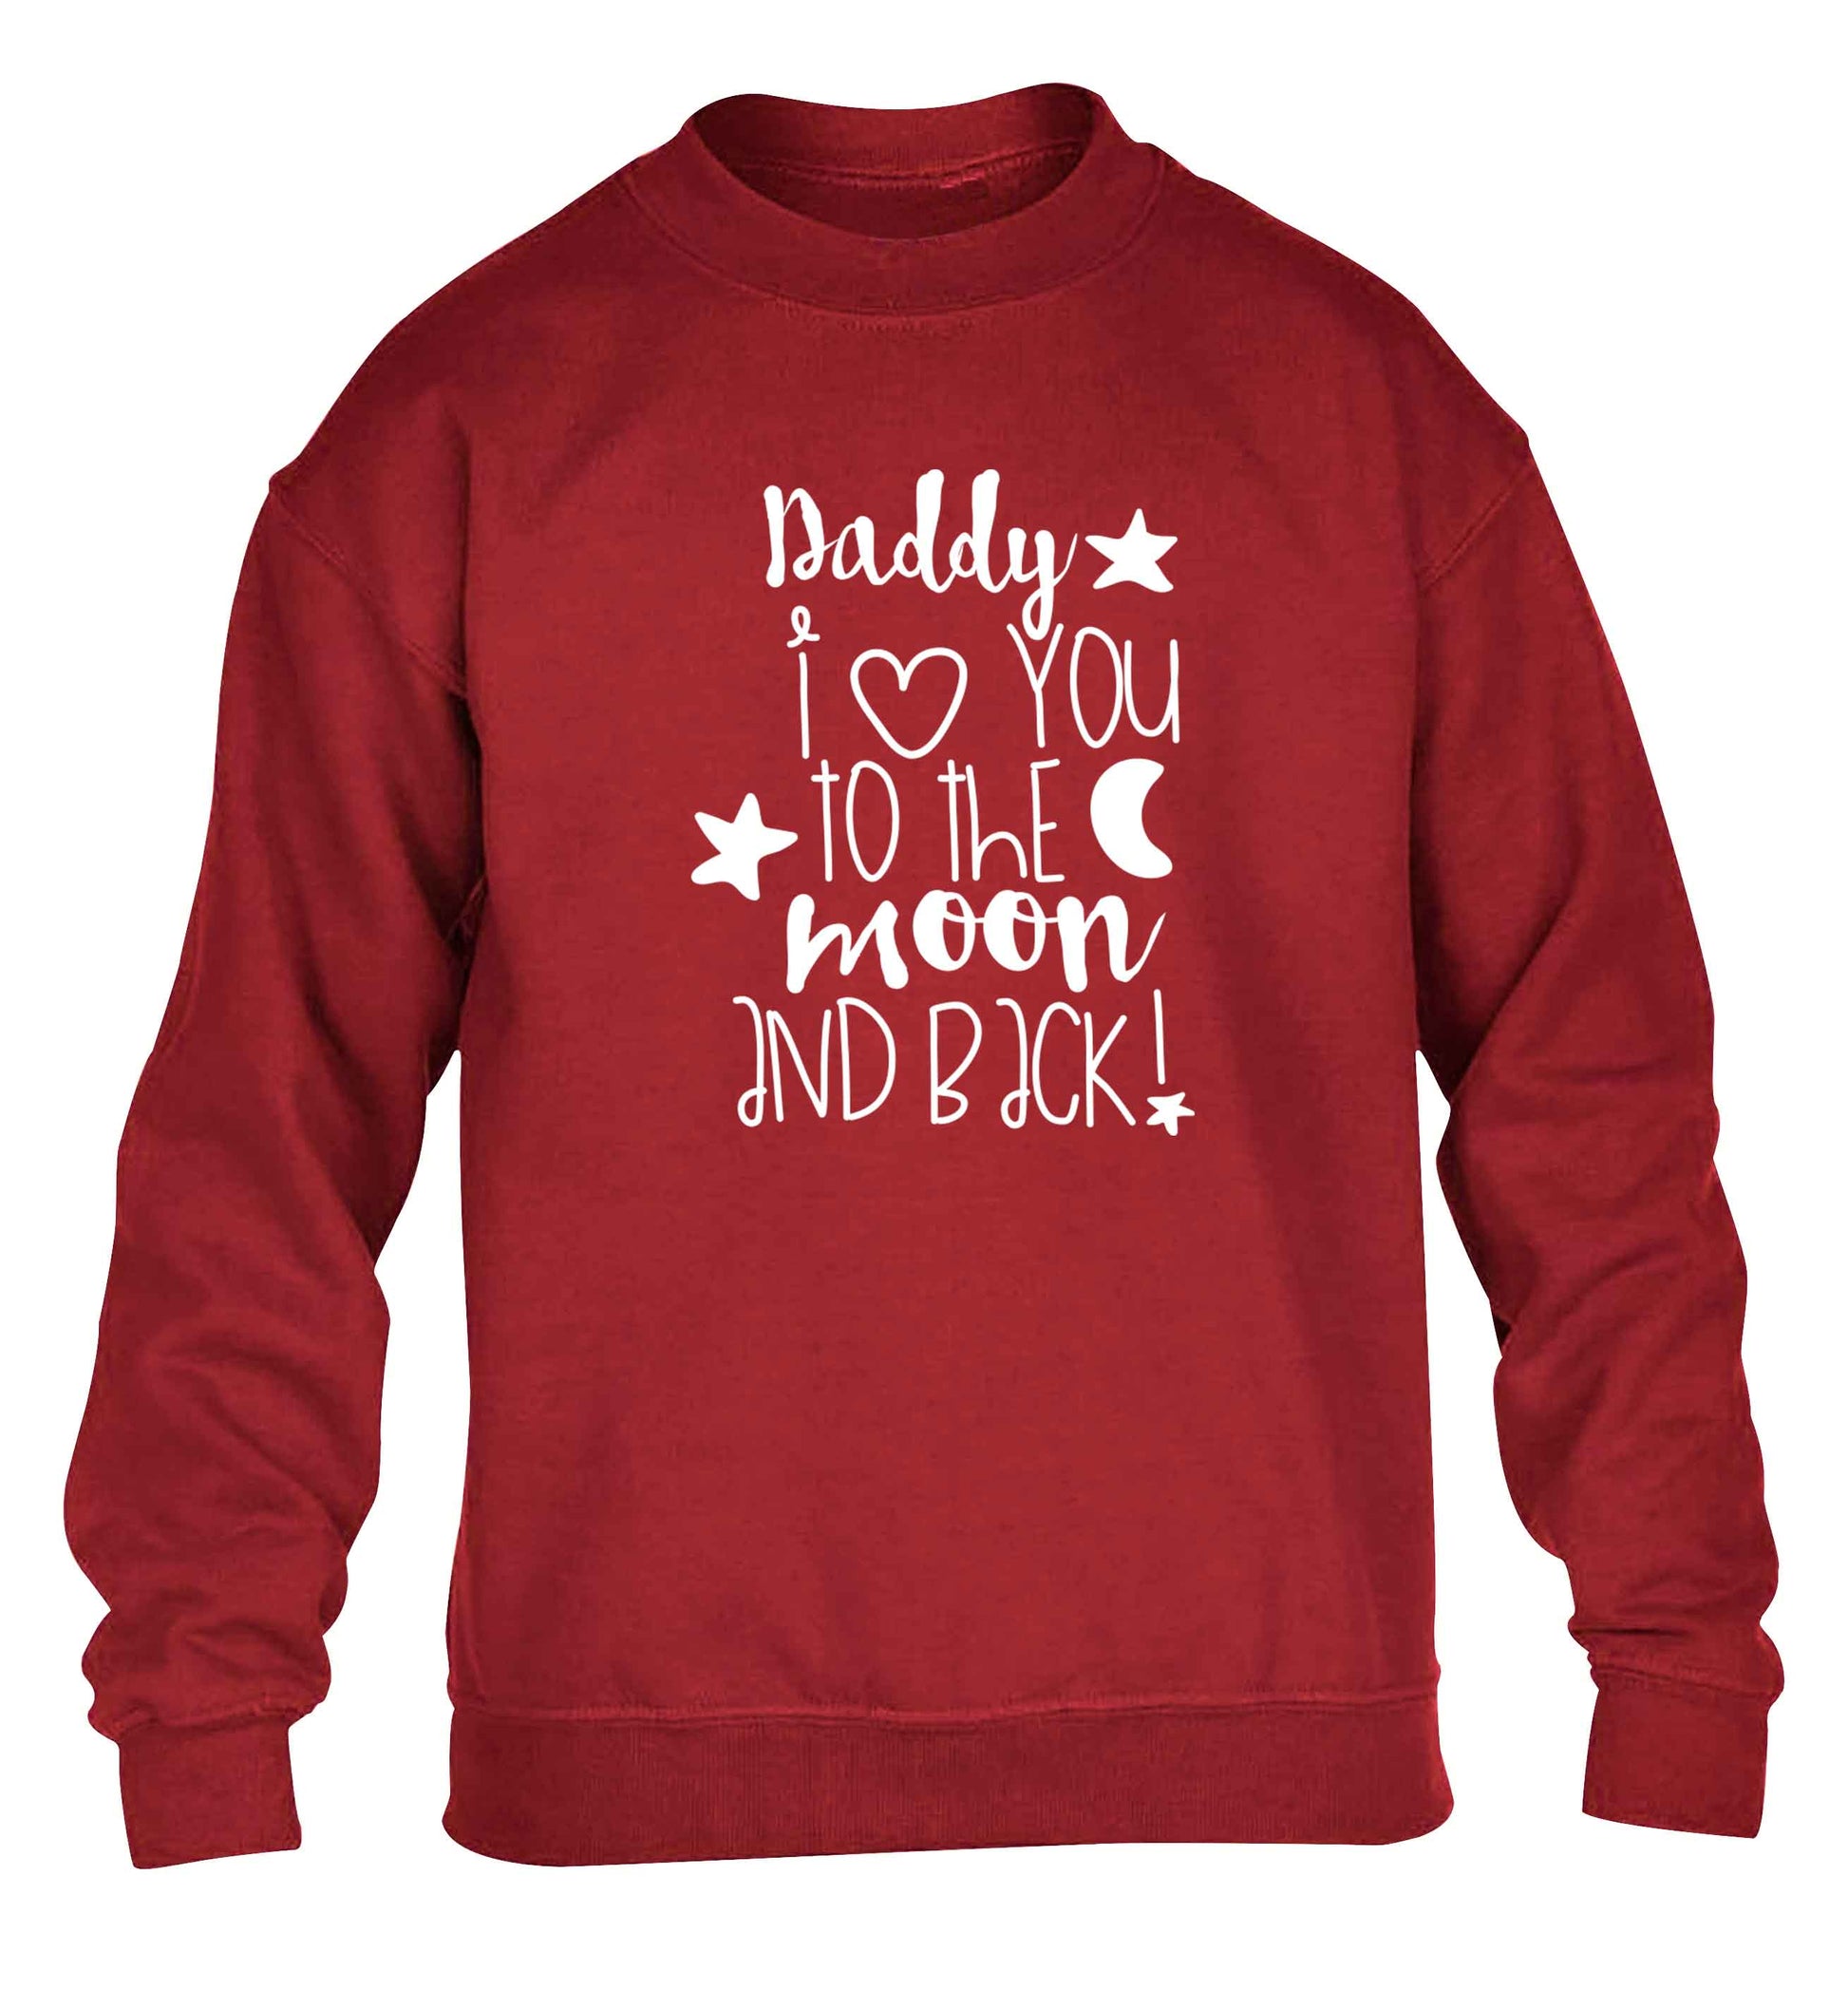 Daddy I love you to the moon and back children's grey sweater 12-13 Years